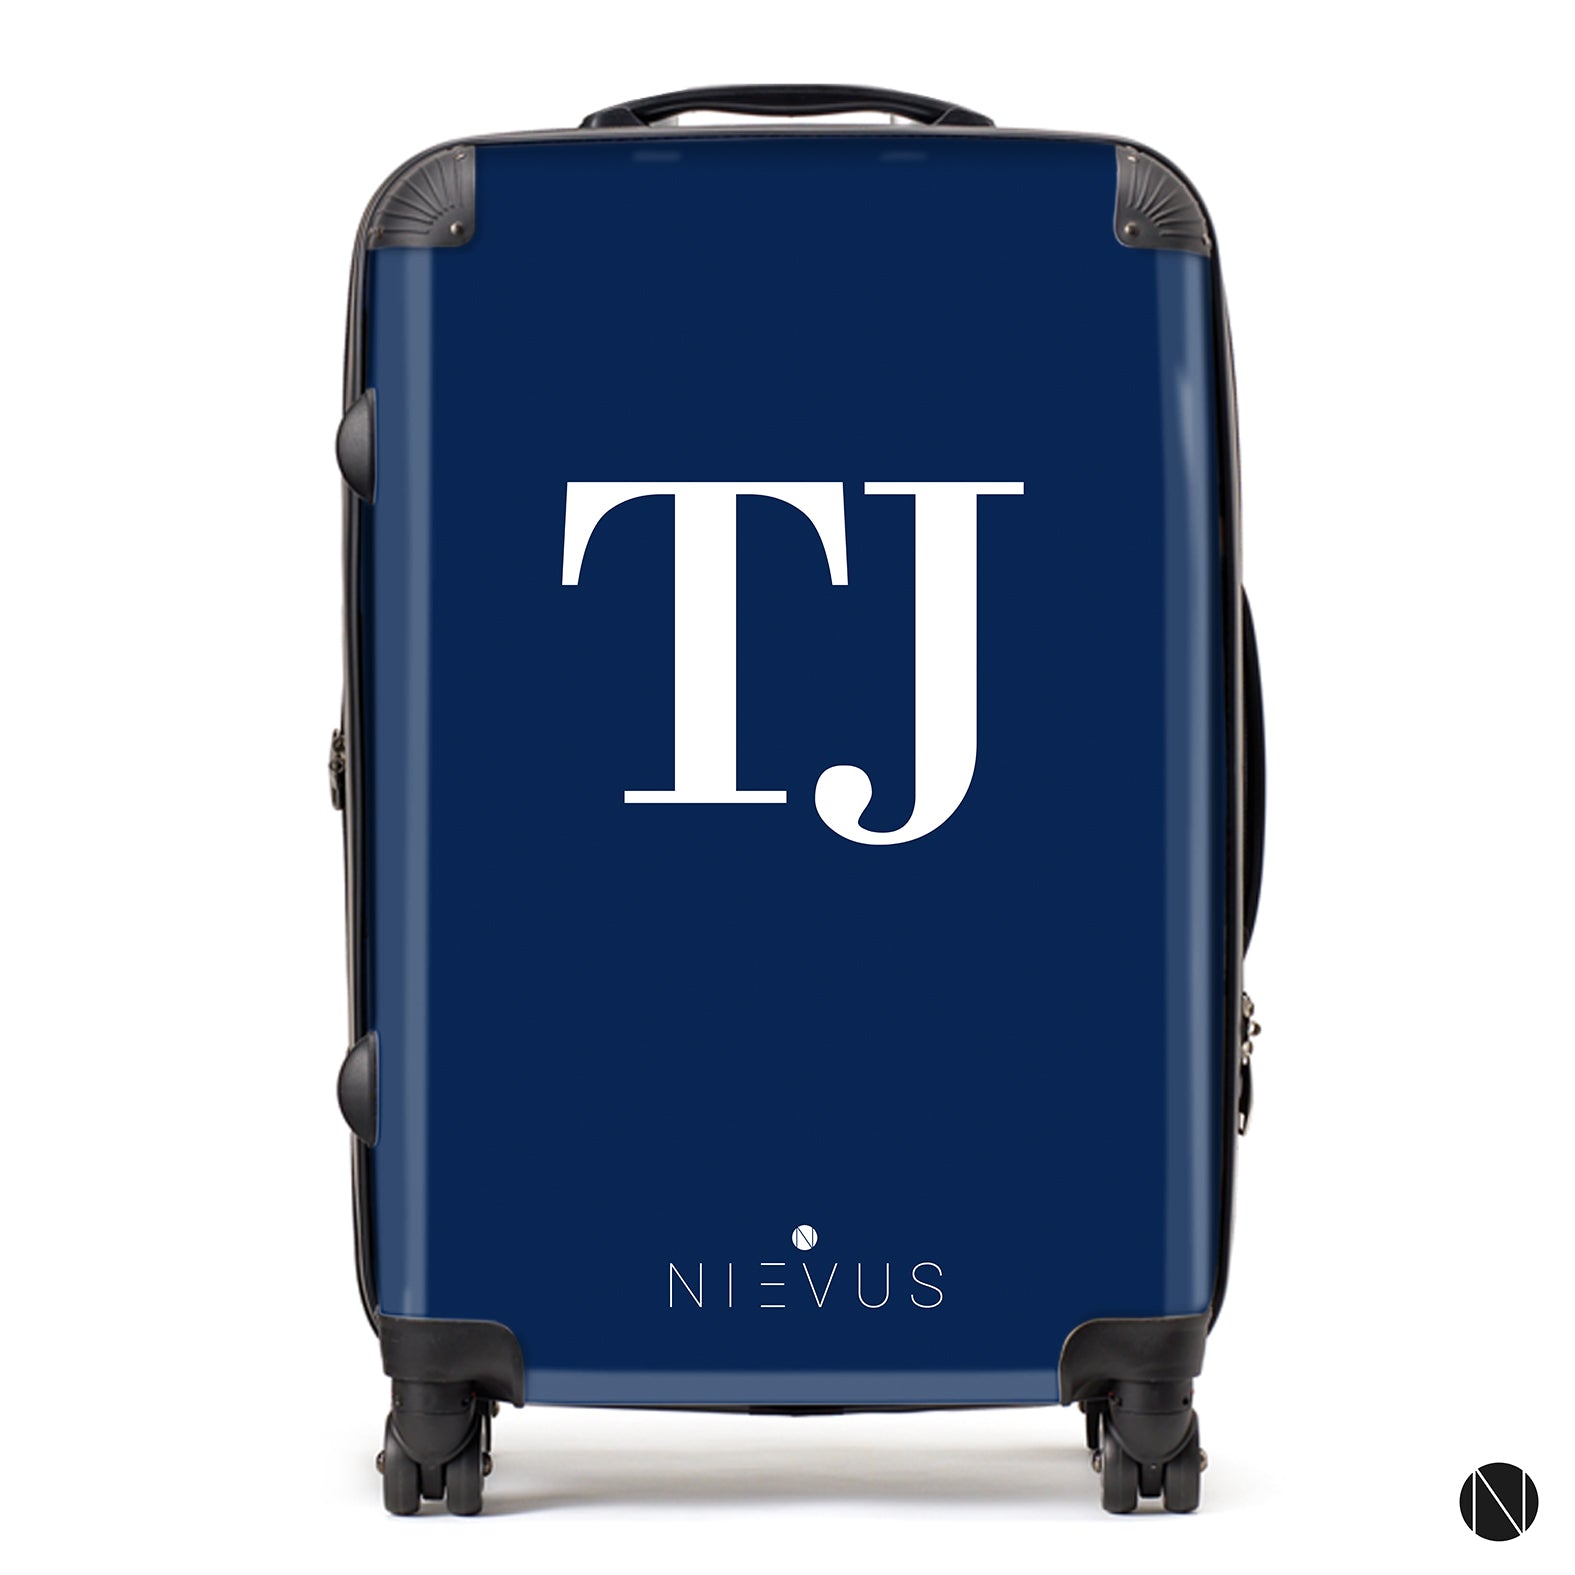 The Personalised Initials Suitcase - Navy Edition